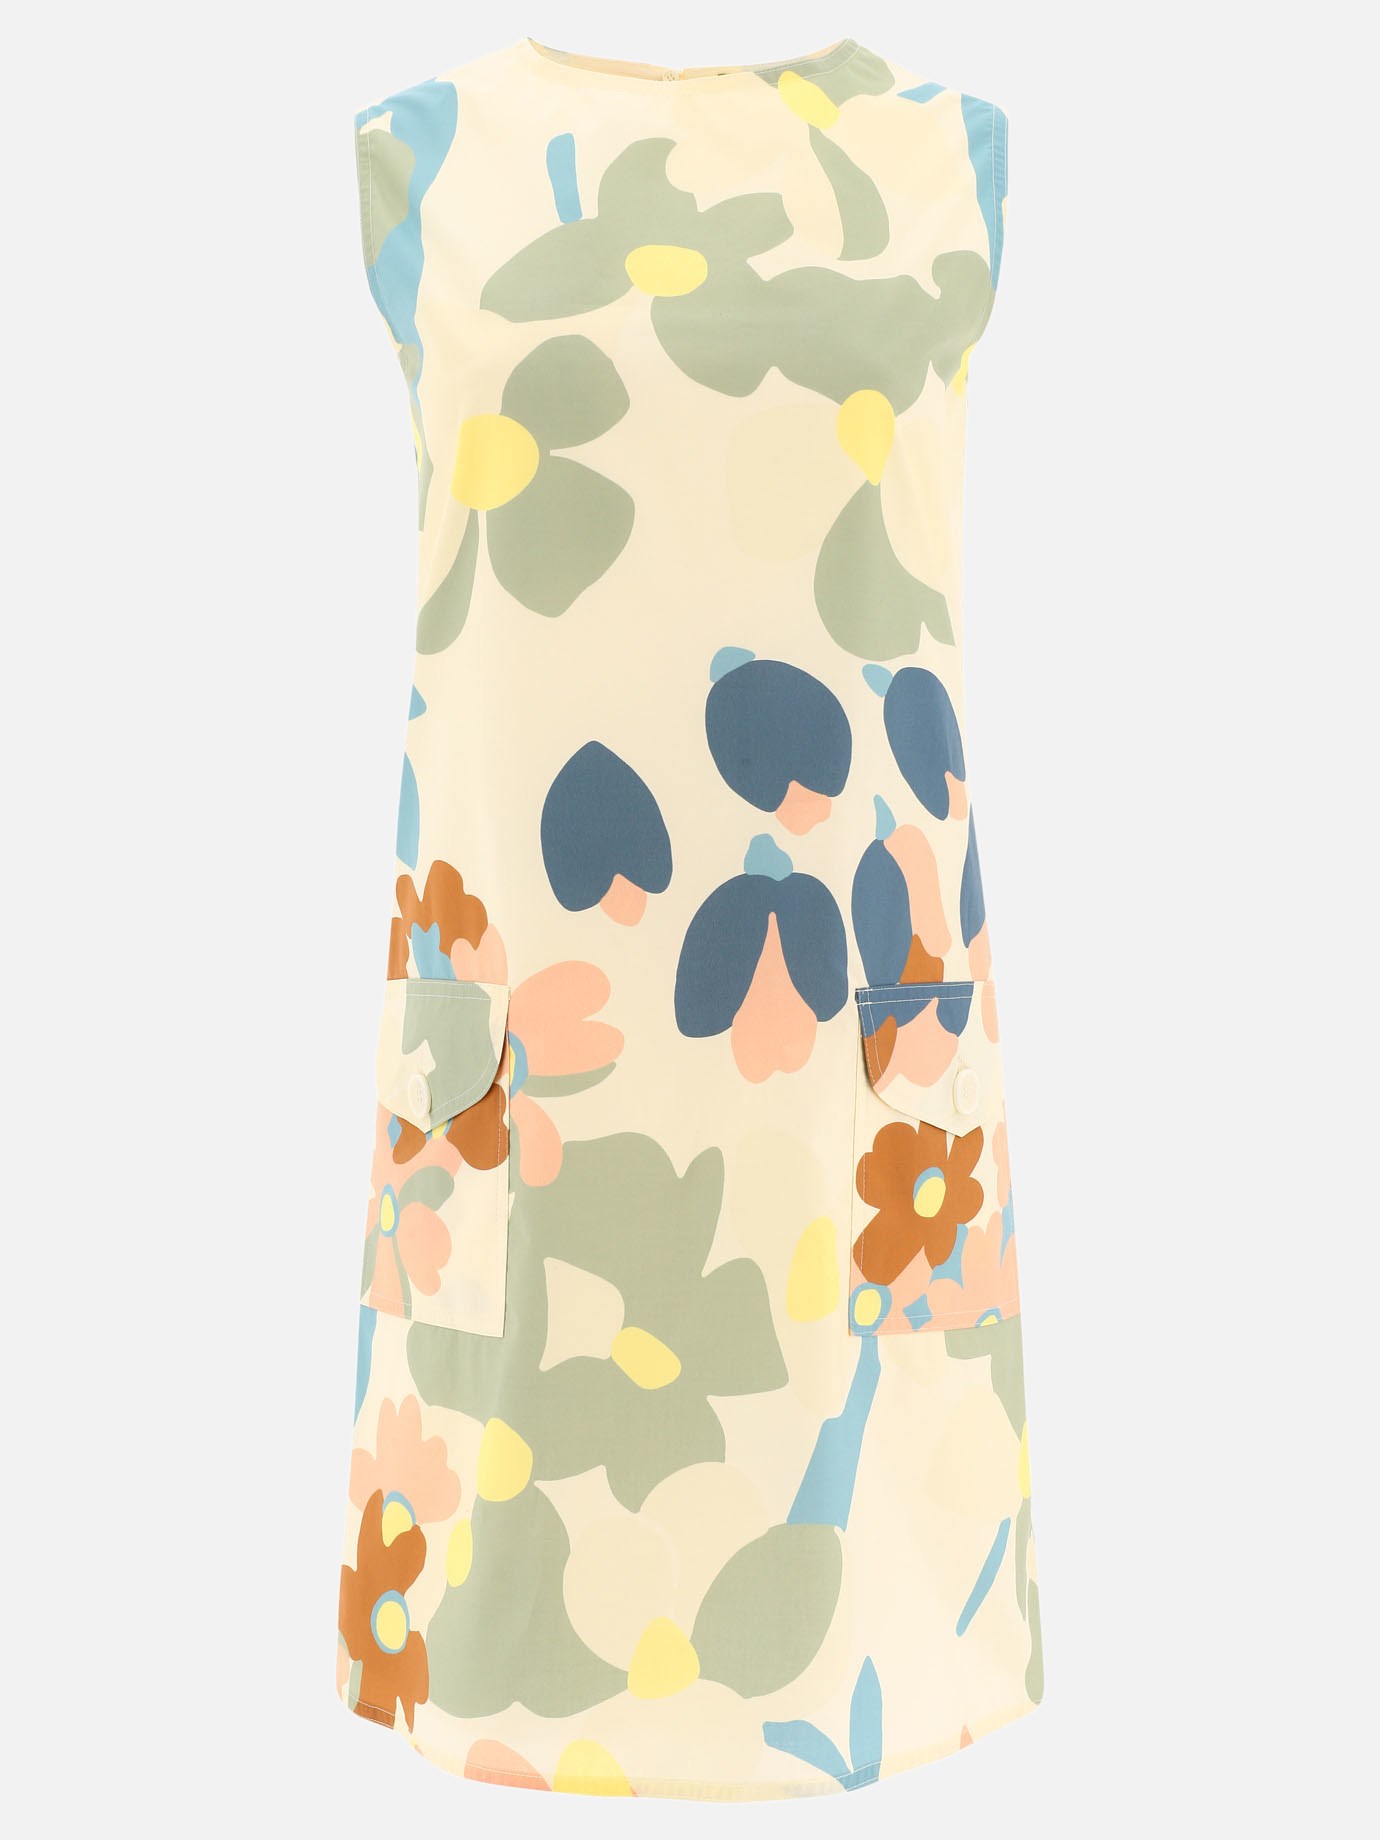 Floral dress with pockets